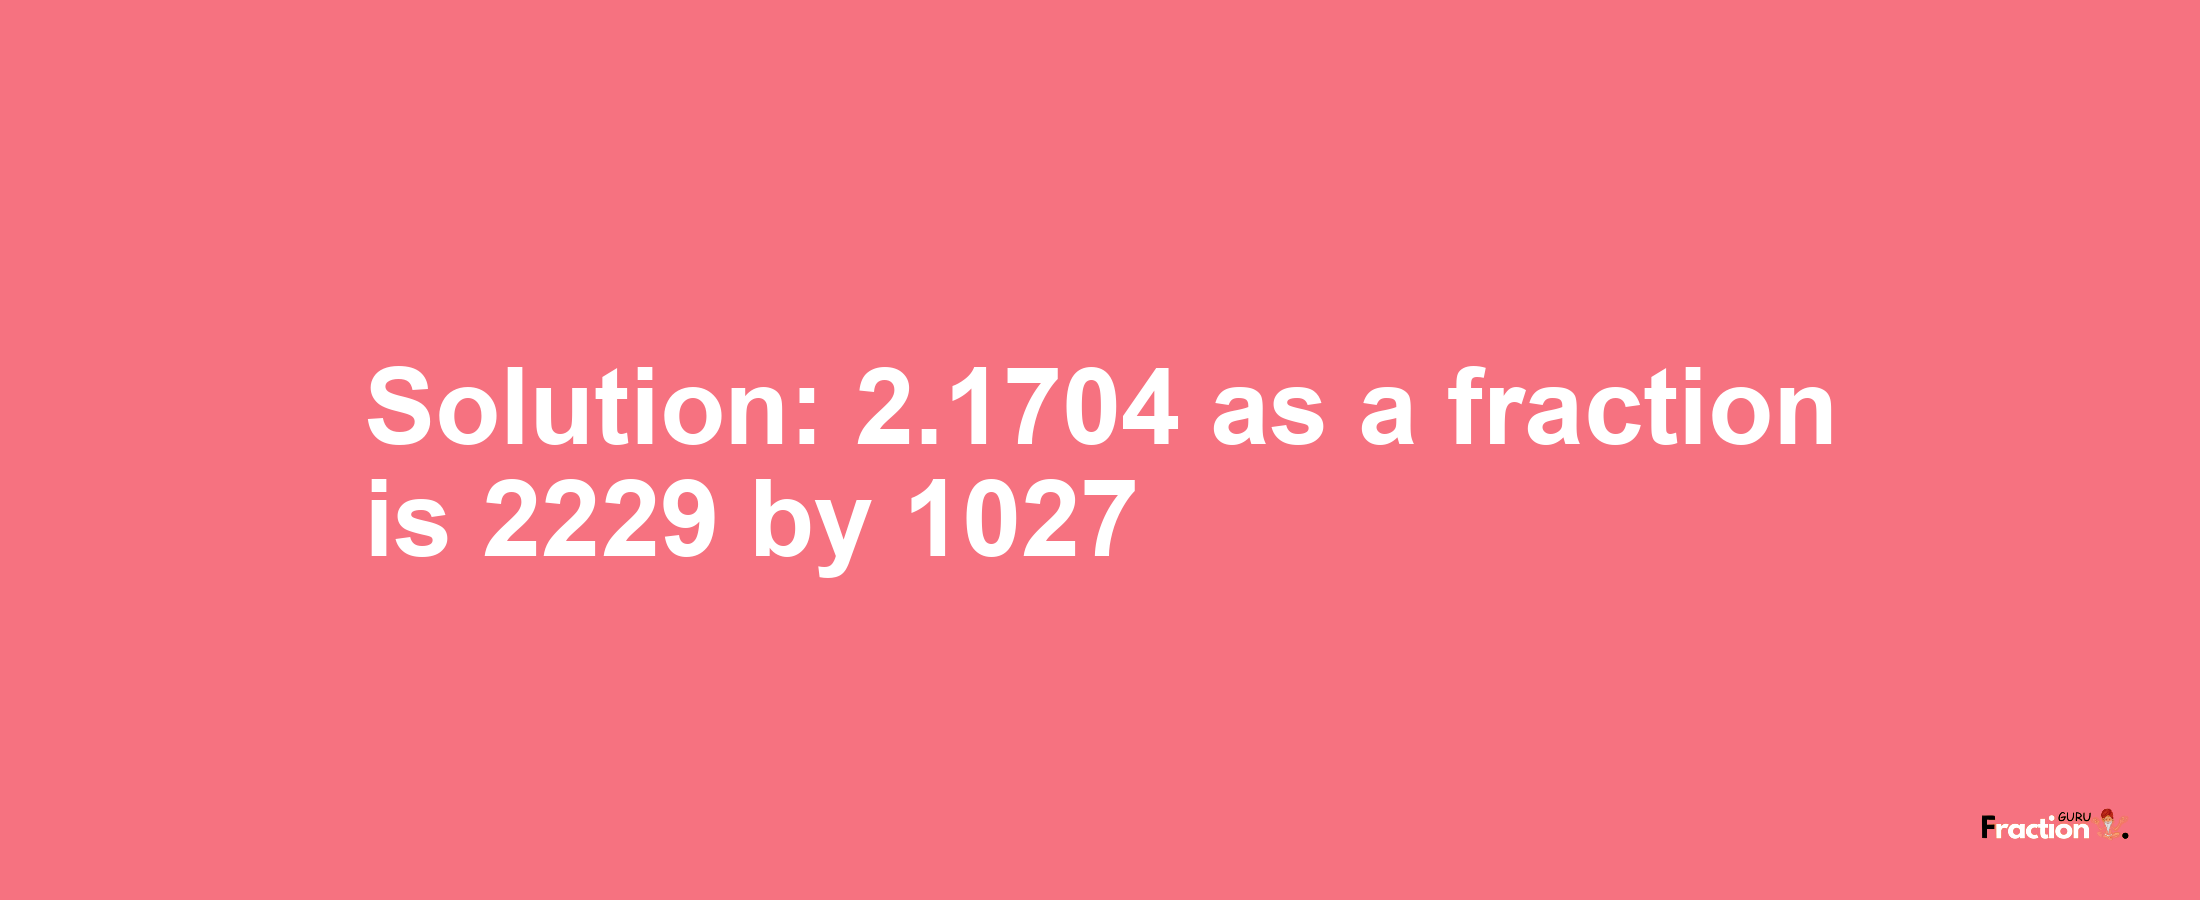 Solution:2.1704 as a fraction is 2229/1027